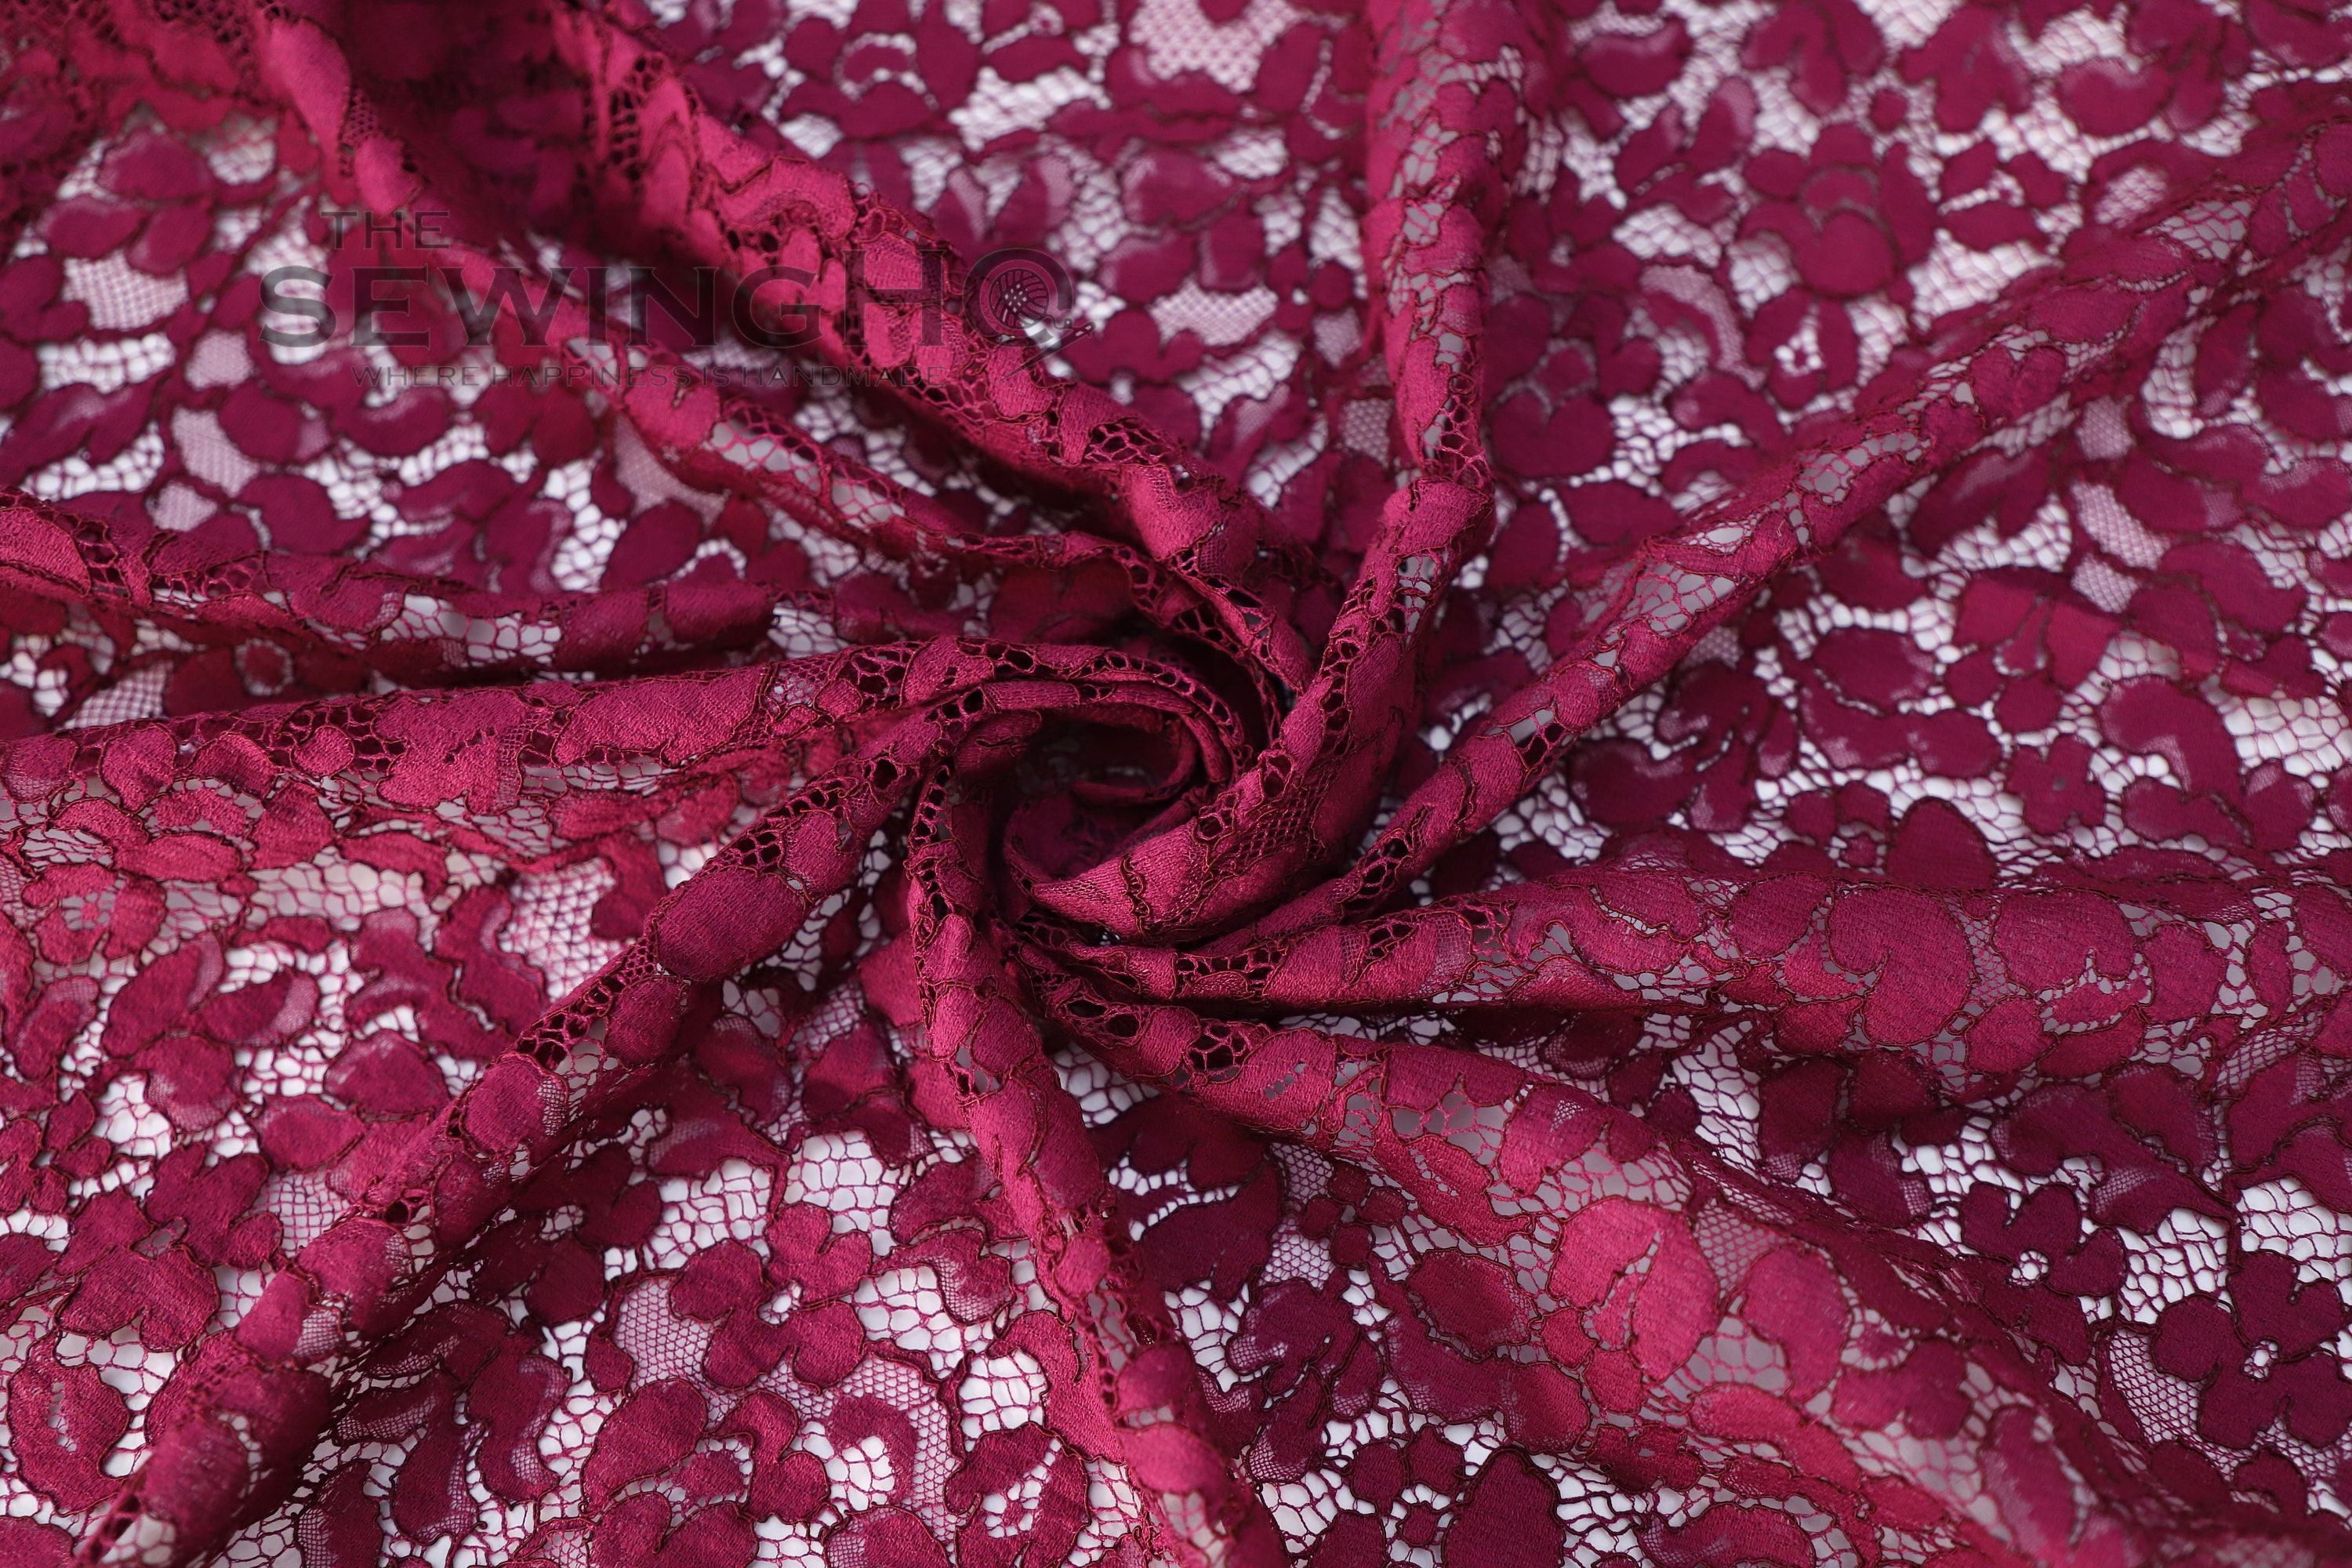 Dark Red Lace Floral Embroidery Fabric — Mikey's Fabric